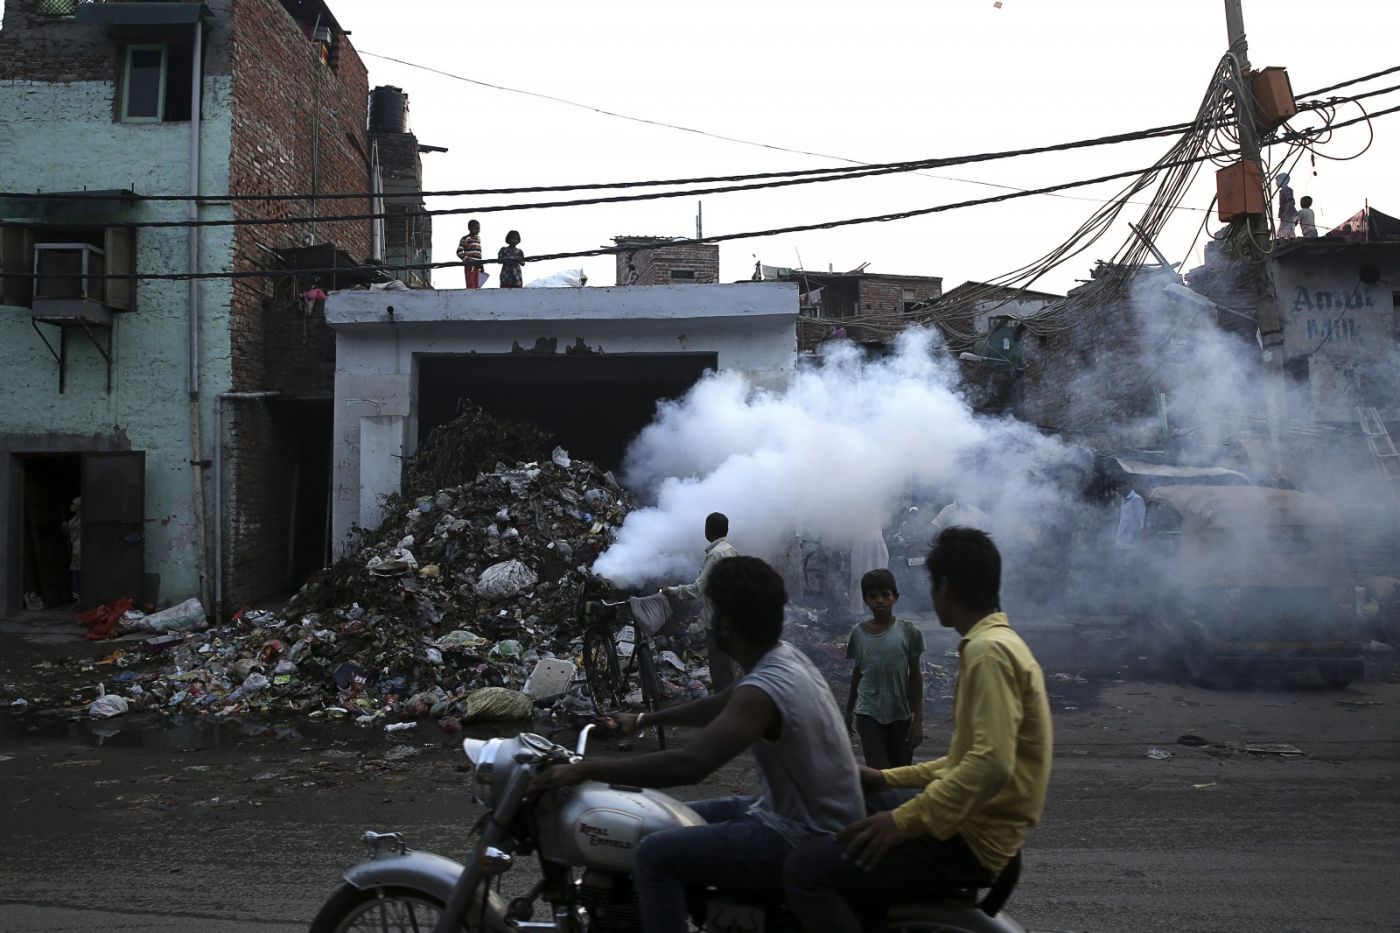 Selling Fresh Air in the World's Most Polluted City